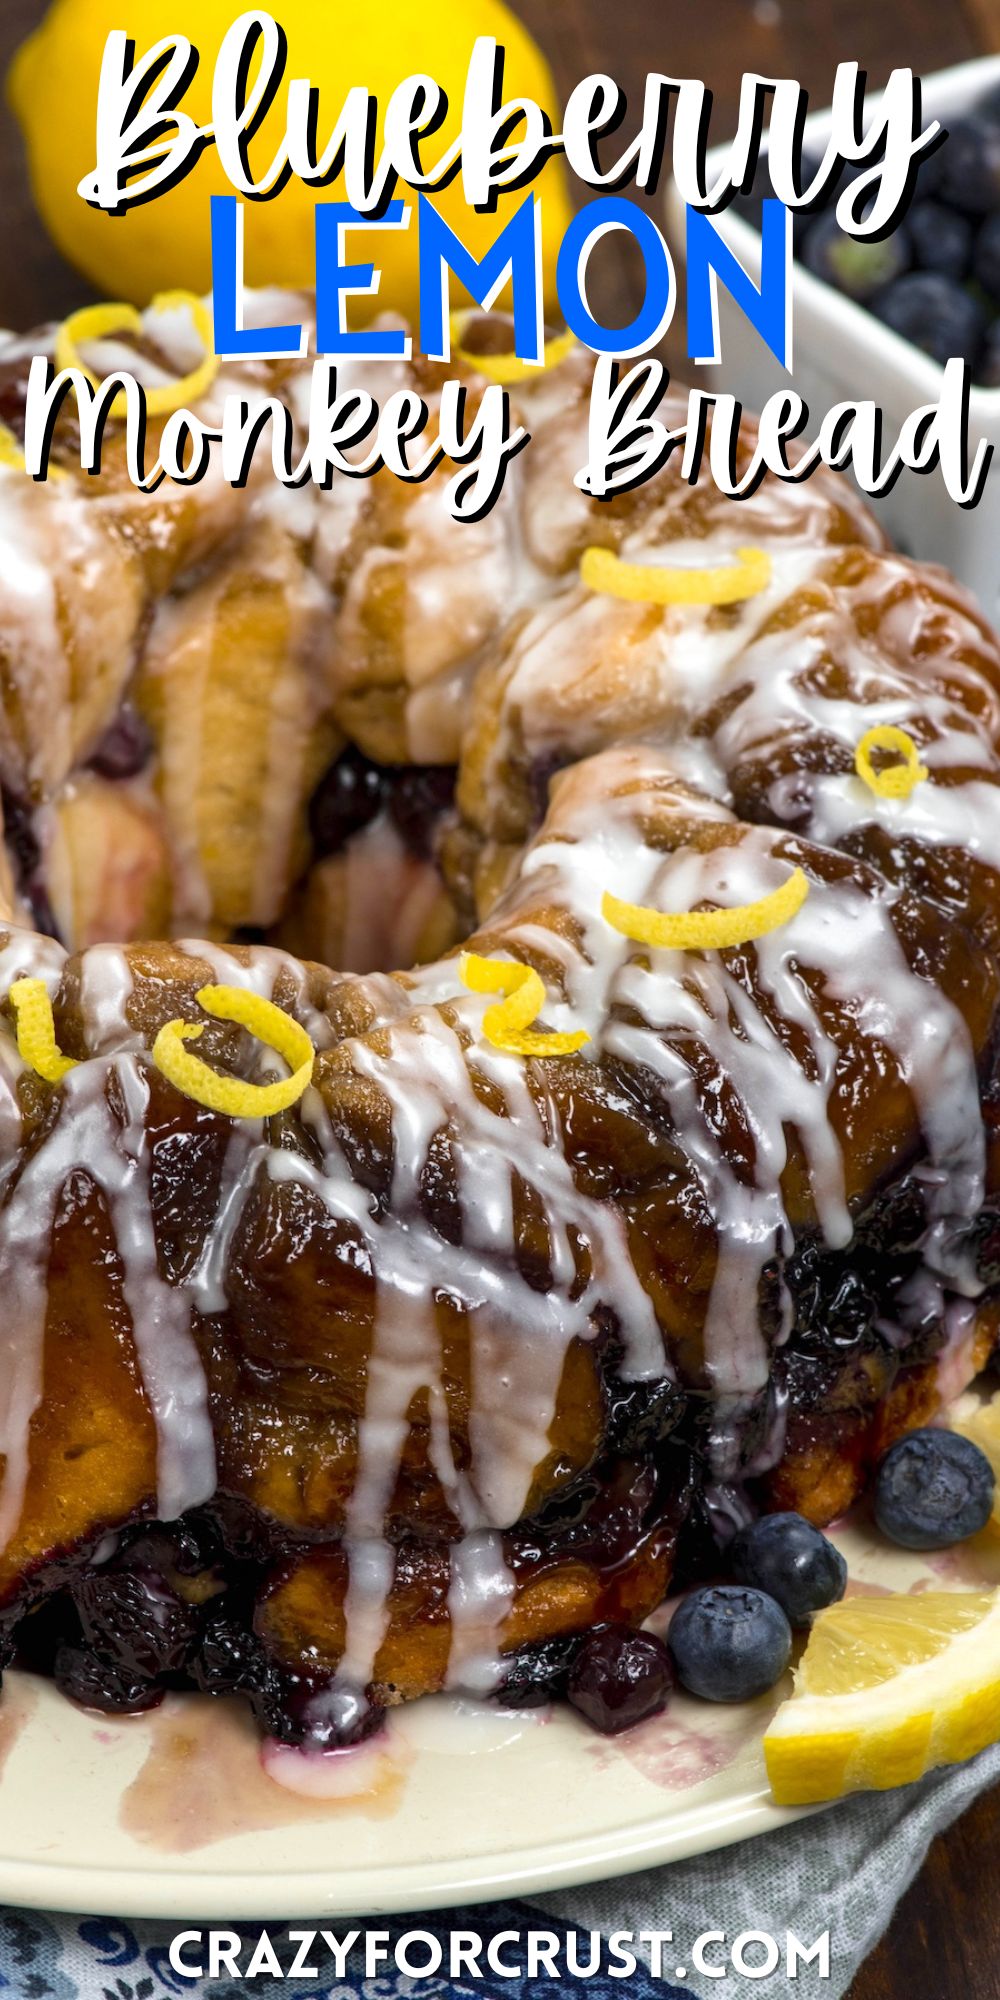 monkey bread covered in glaze and blueberries and lemon slices with words on the image.